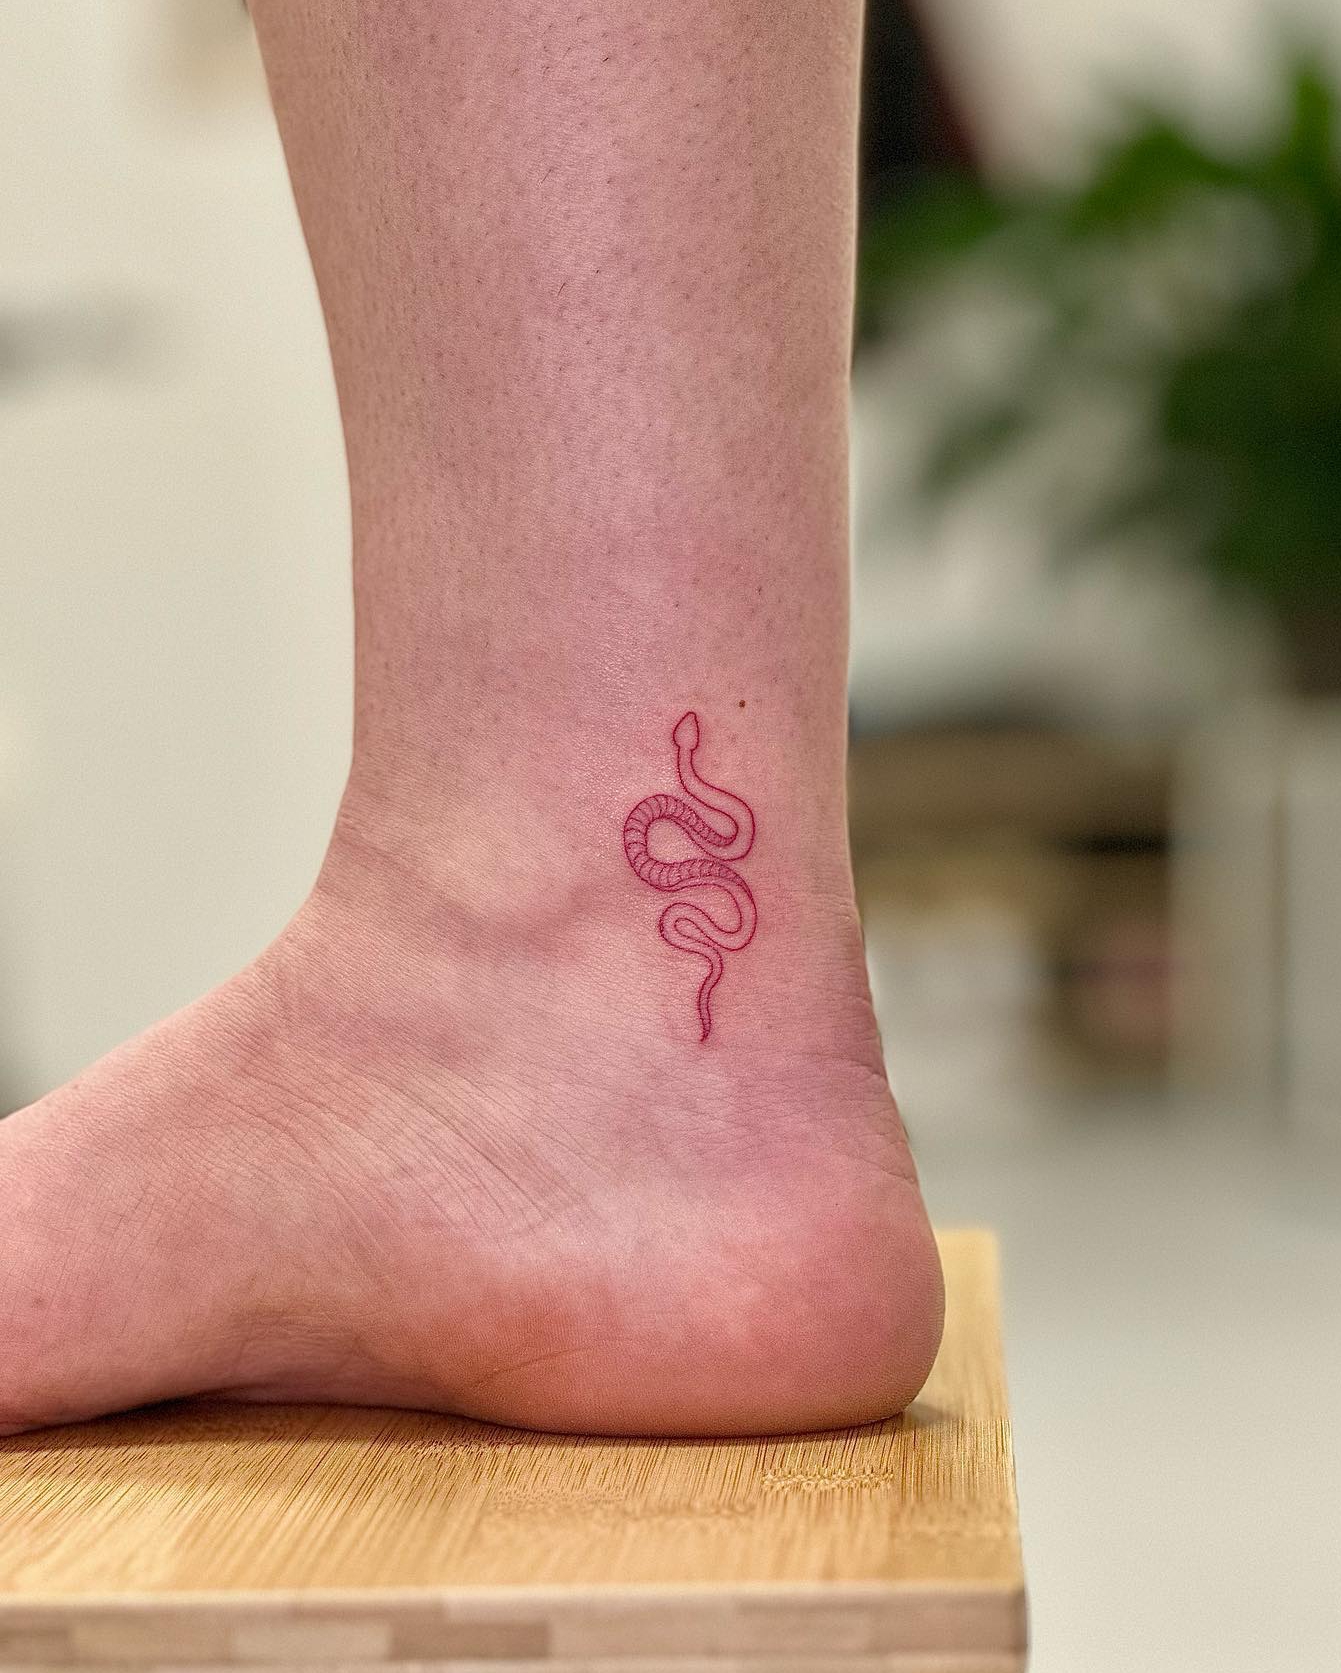 Tiny Chinese Snake Tattoo on Ankle